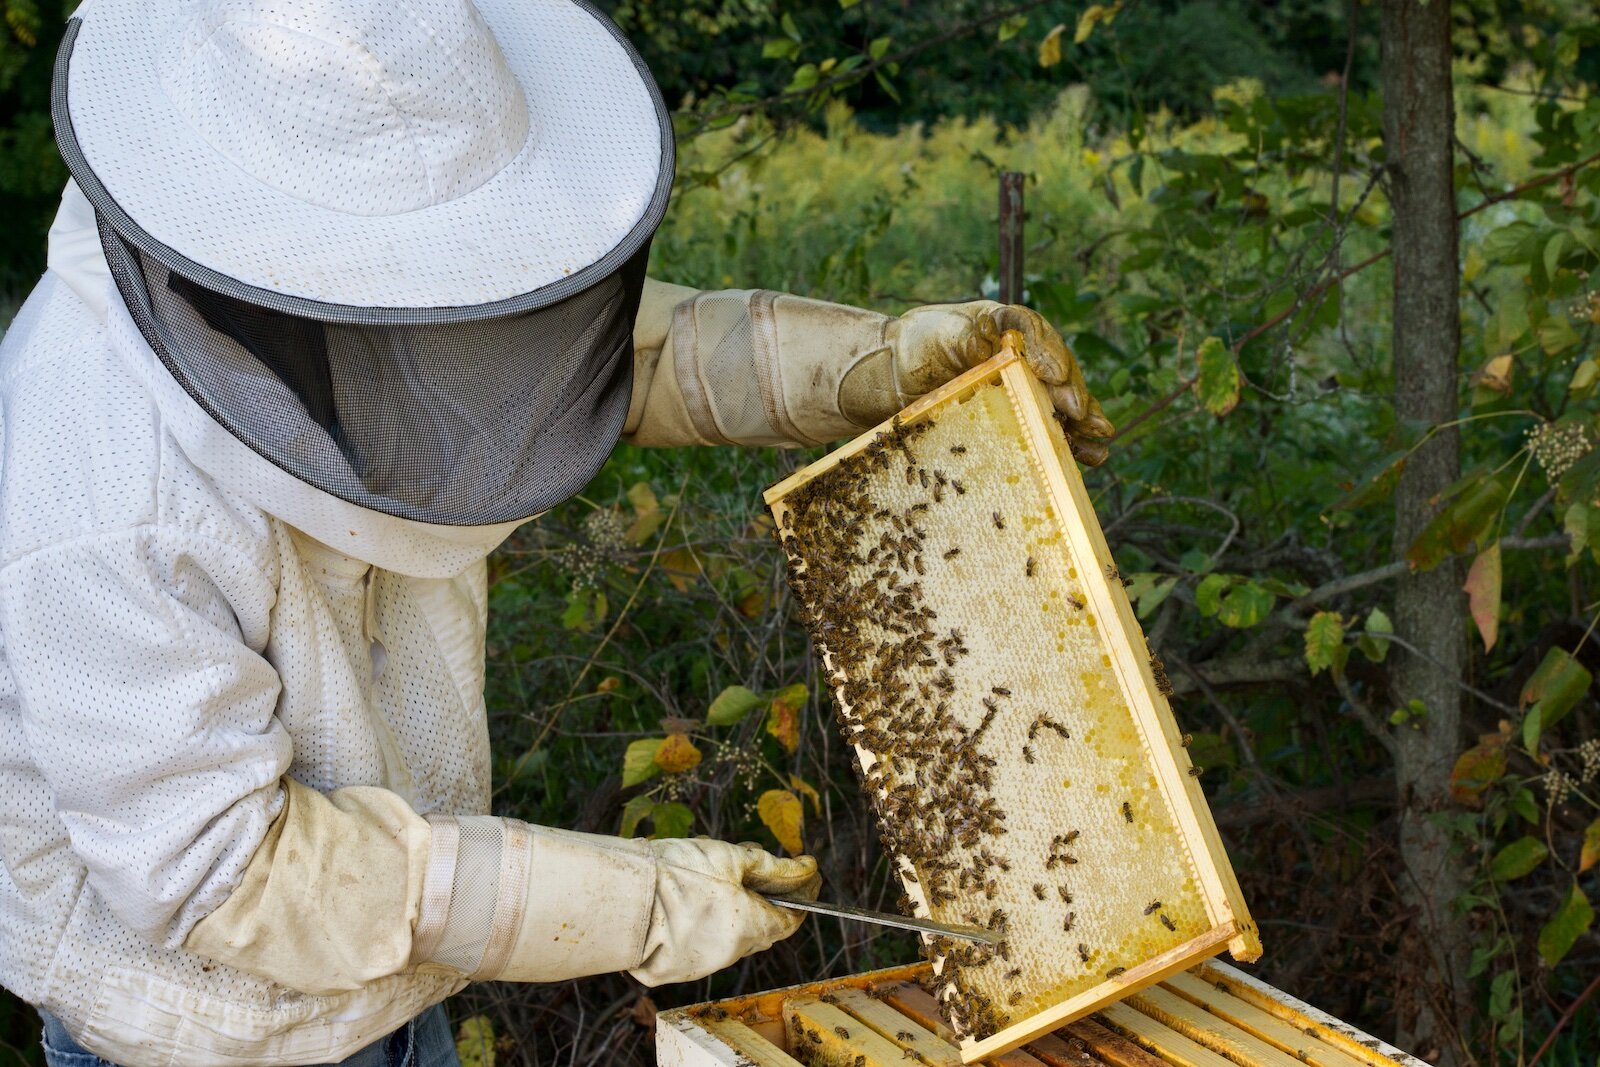 Apiarist Don Ueber is innovating with honey at Tanglewood Berry Farm.